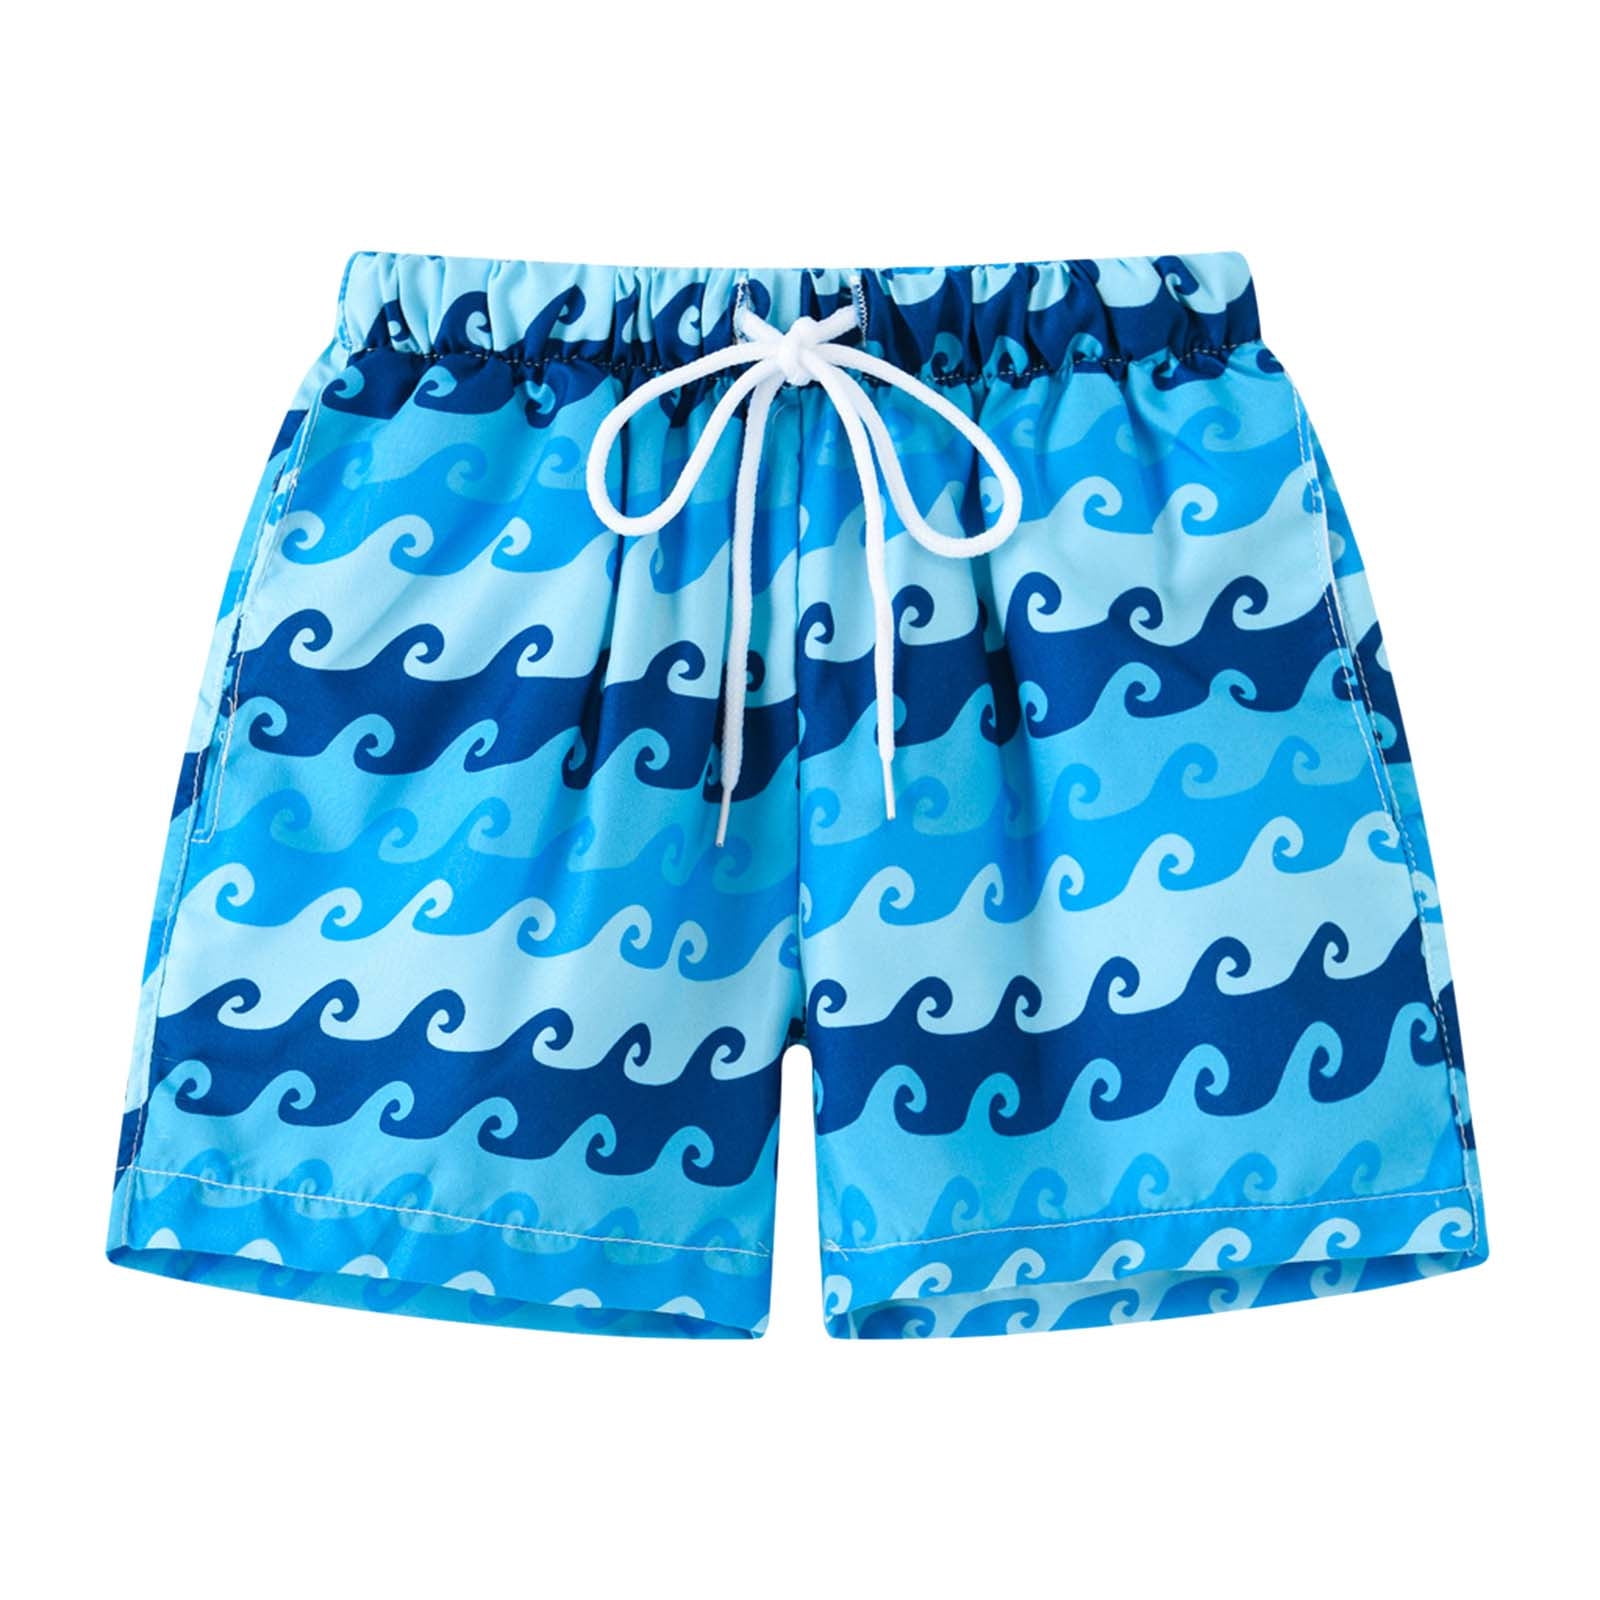 Boys Swimsuits Toddler Summer Boys Swimming Trunks Fashion Resort Style ...